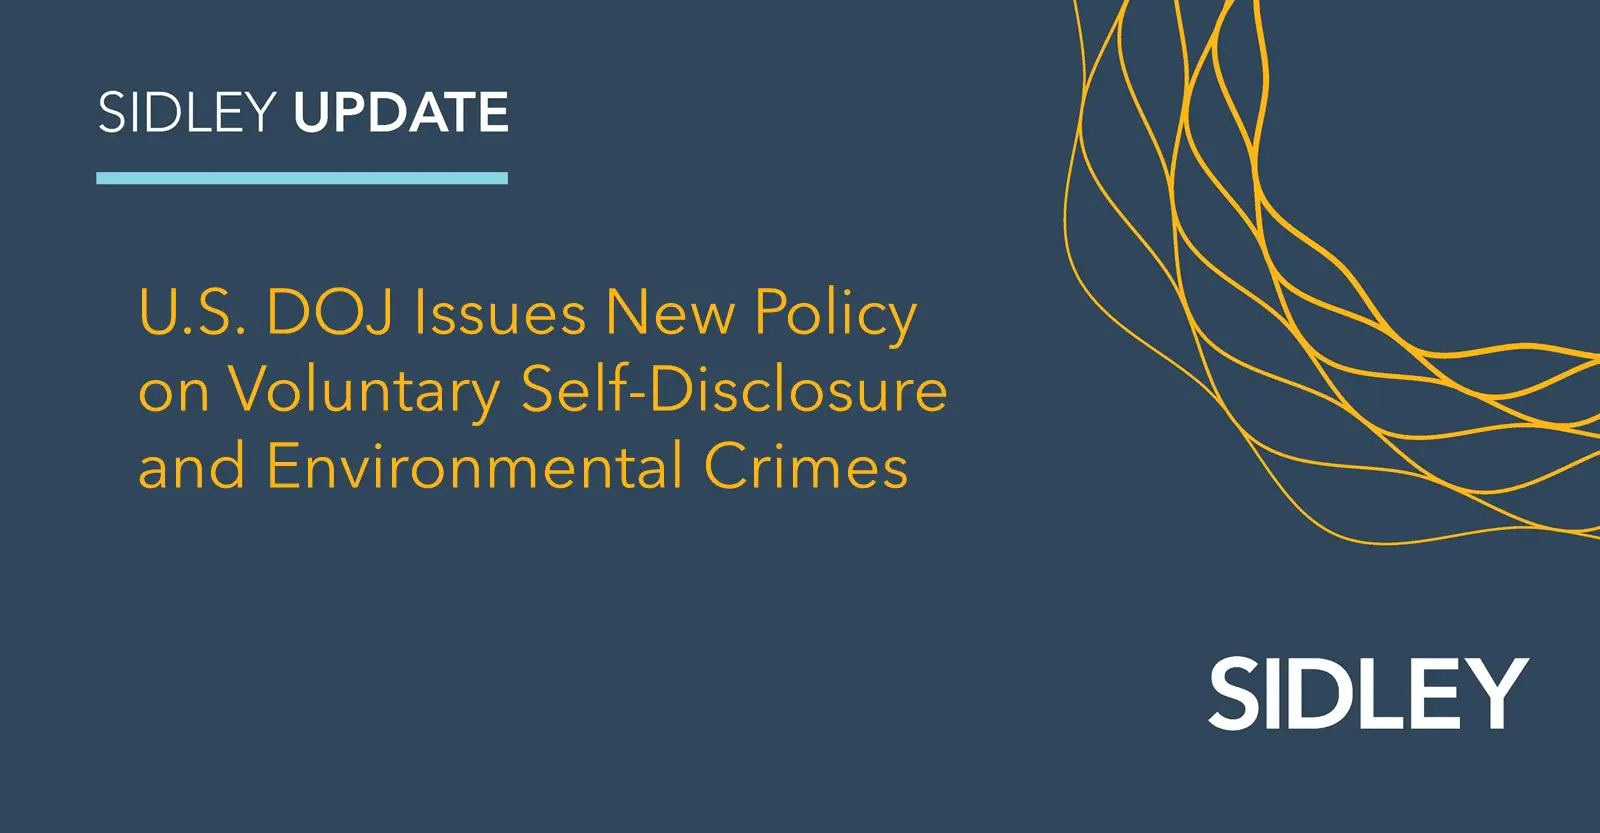 U.S. DOJ Issues New Policy on Voluntary Self-Disclosure and Environmental Crimes | Insights